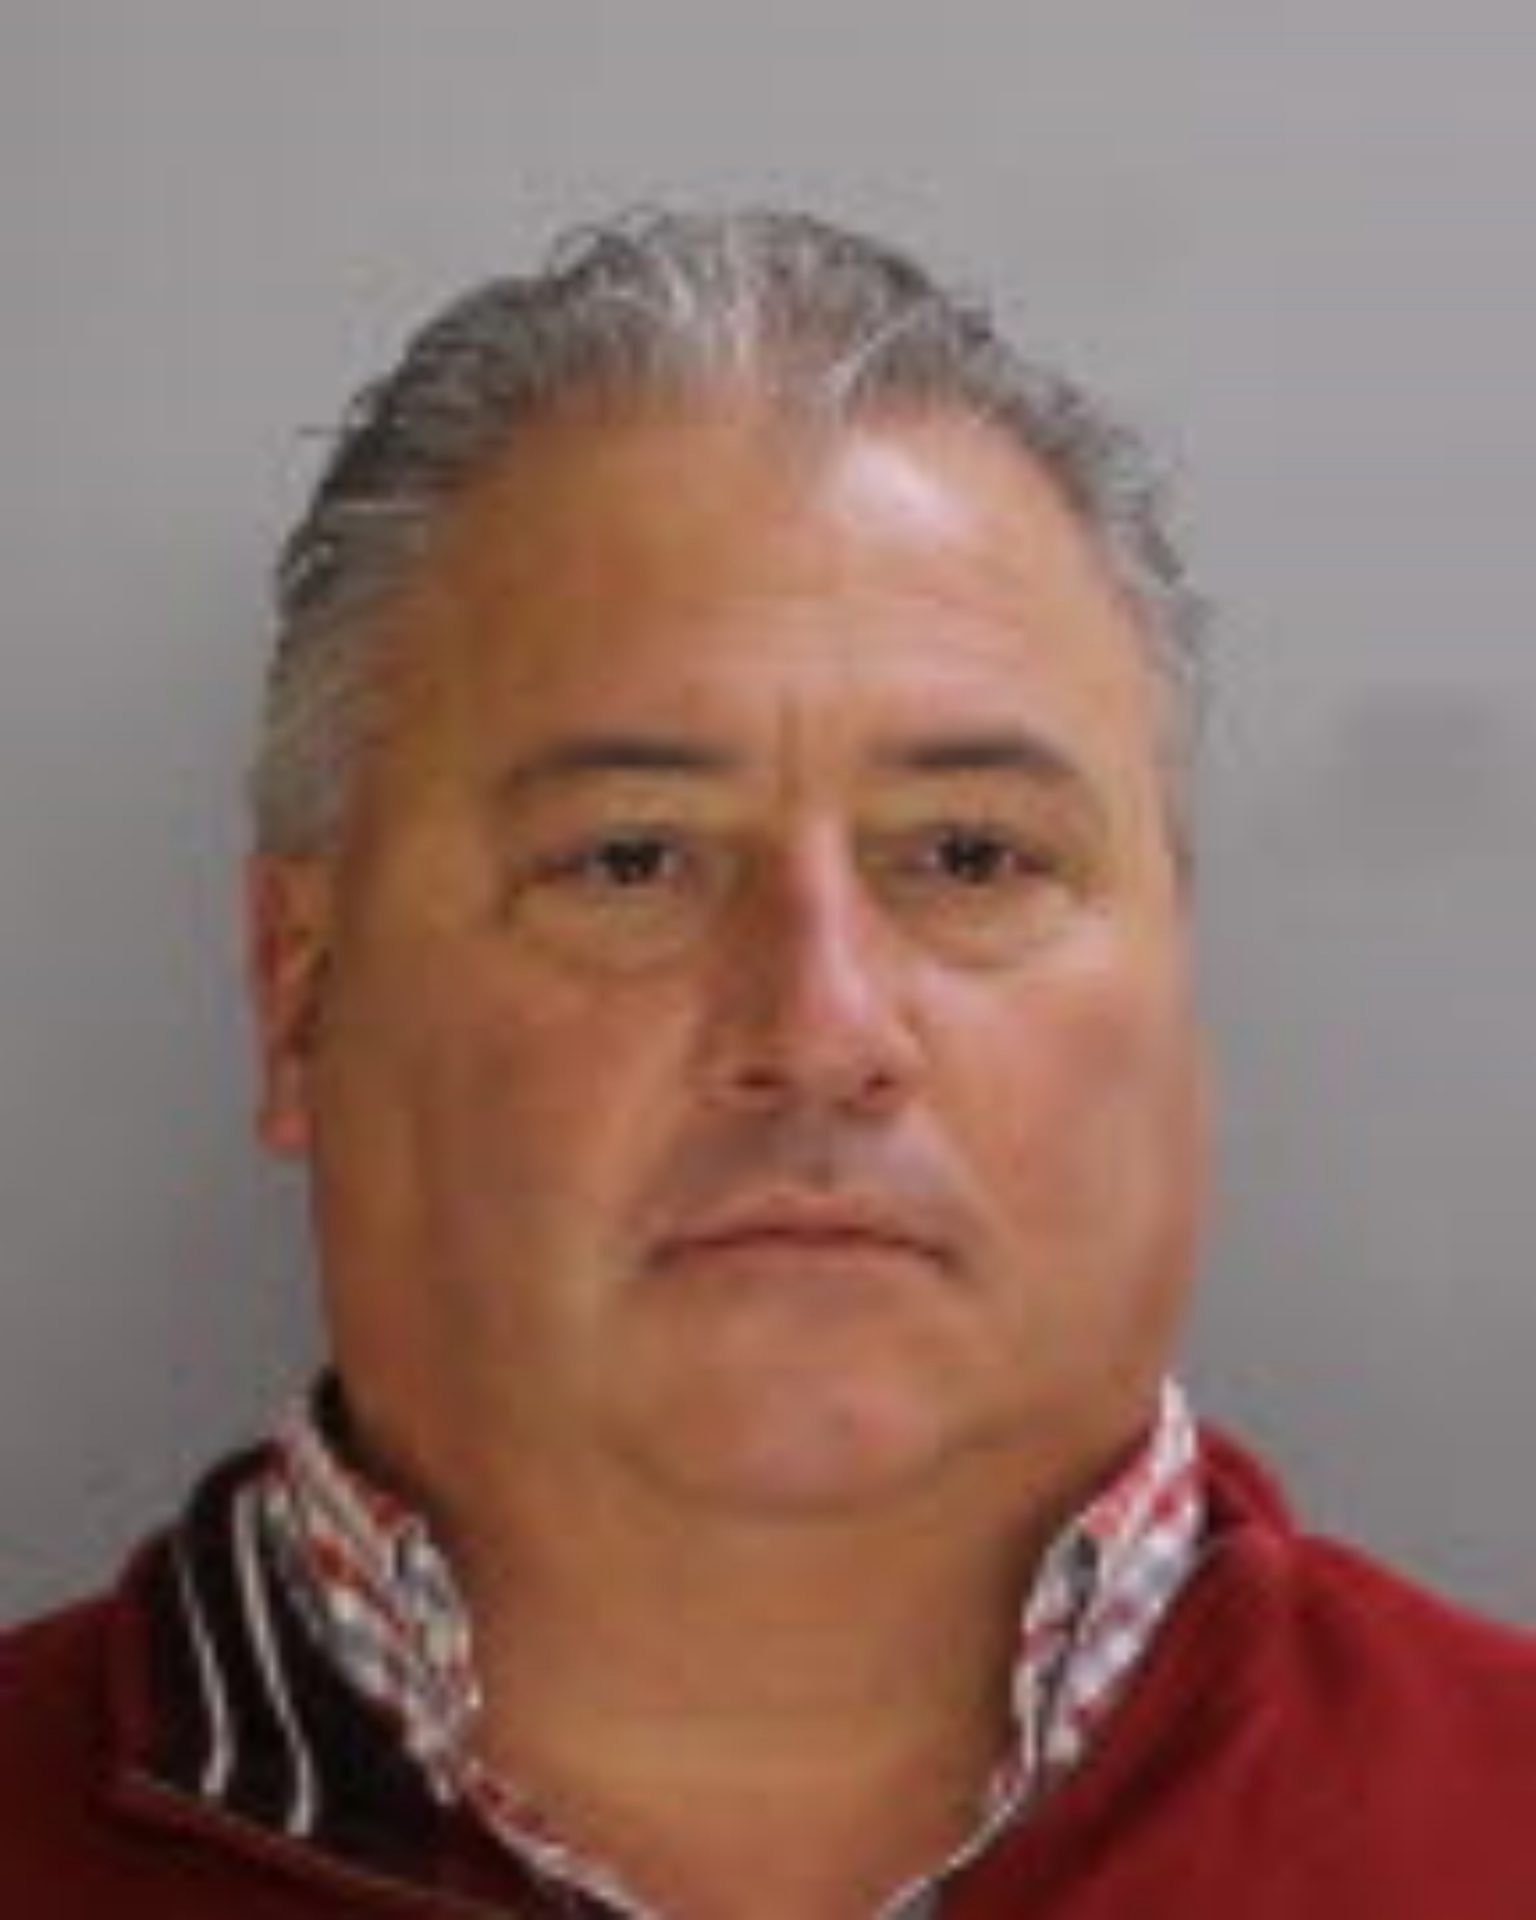 Michael Boffo, site security supervisor for TigerSwan, faces charges of bribery and conspiracy related to security of the Mariner East 2 pipeline in Chester County.